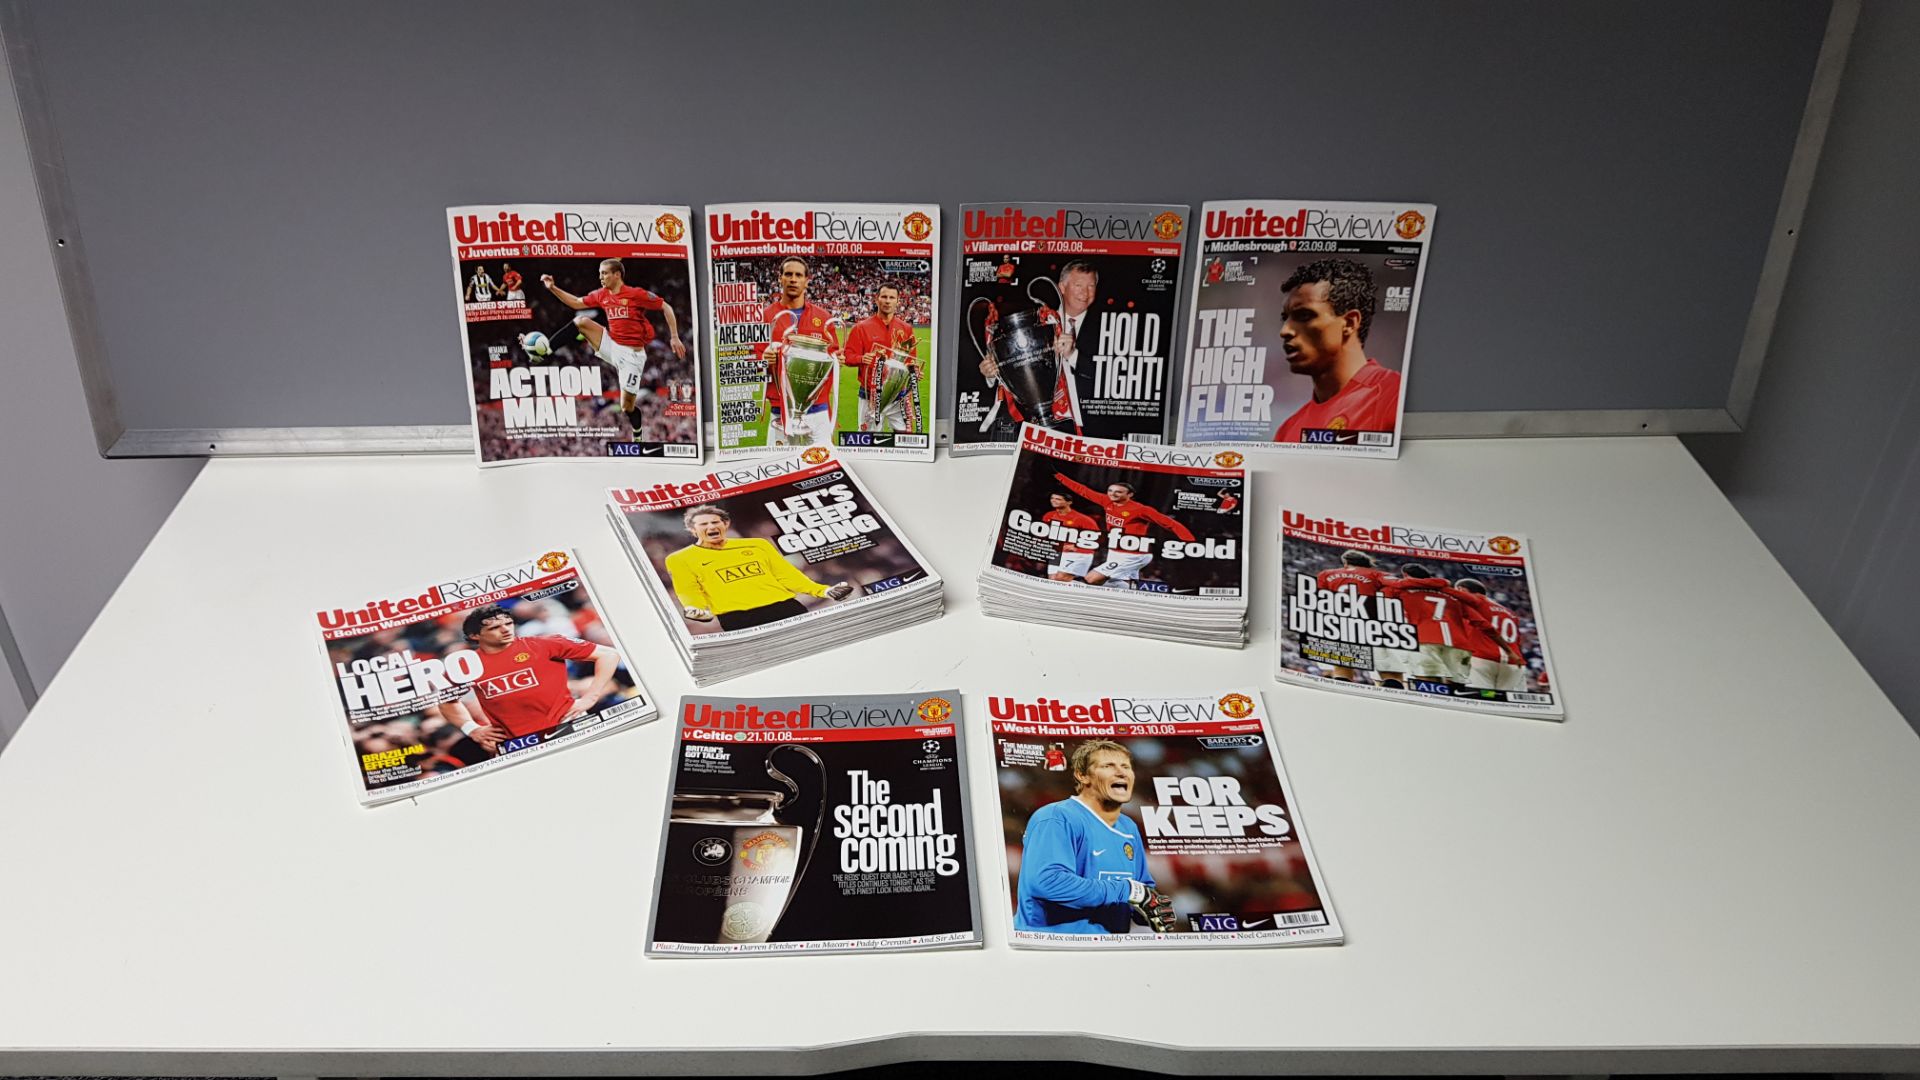 COMPLETE COLLECTION OF MANCHESTER UNITED HOME GAME PROGRAMMES FROM THE 2008/09 SEASON. FROM ISSUE